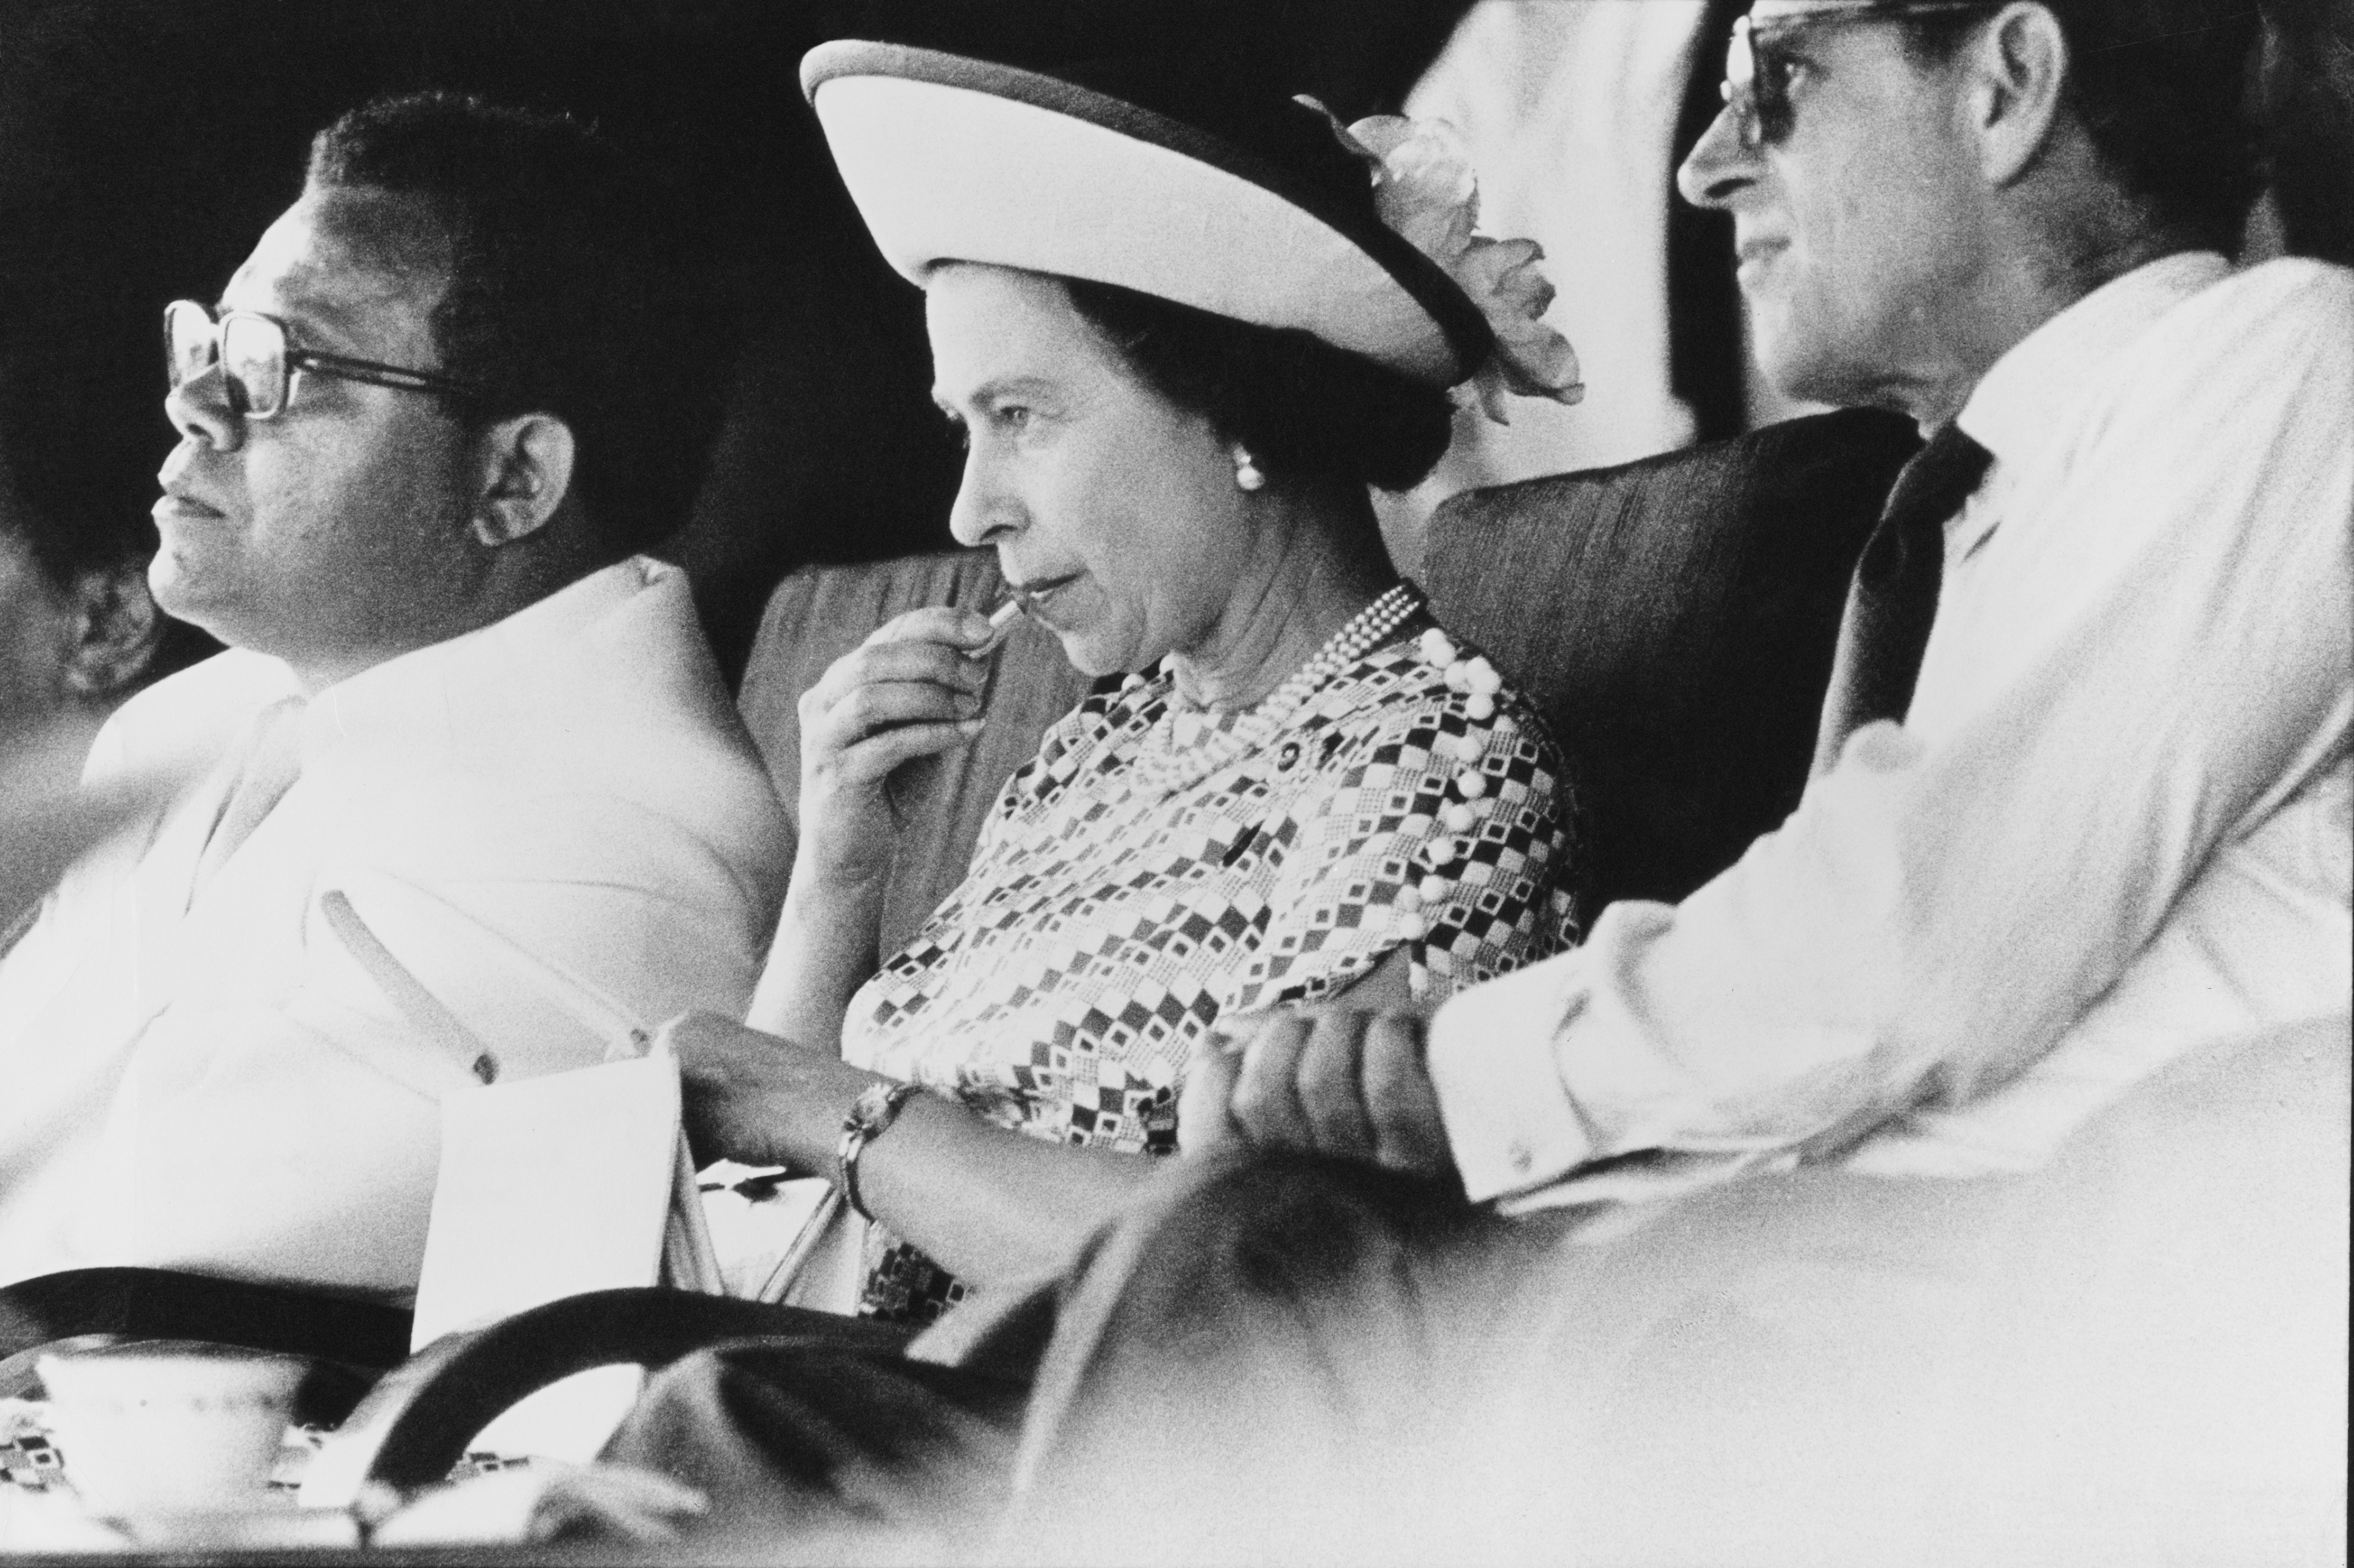 Queen Elizabeth II applies her lipstick at a function during a visit to Fiji with Prince Philip (right), February 1977. (Photo by Tim Graham/Hulton Archive/Getty Images) (Foto: Tim Graham/Getty Images)